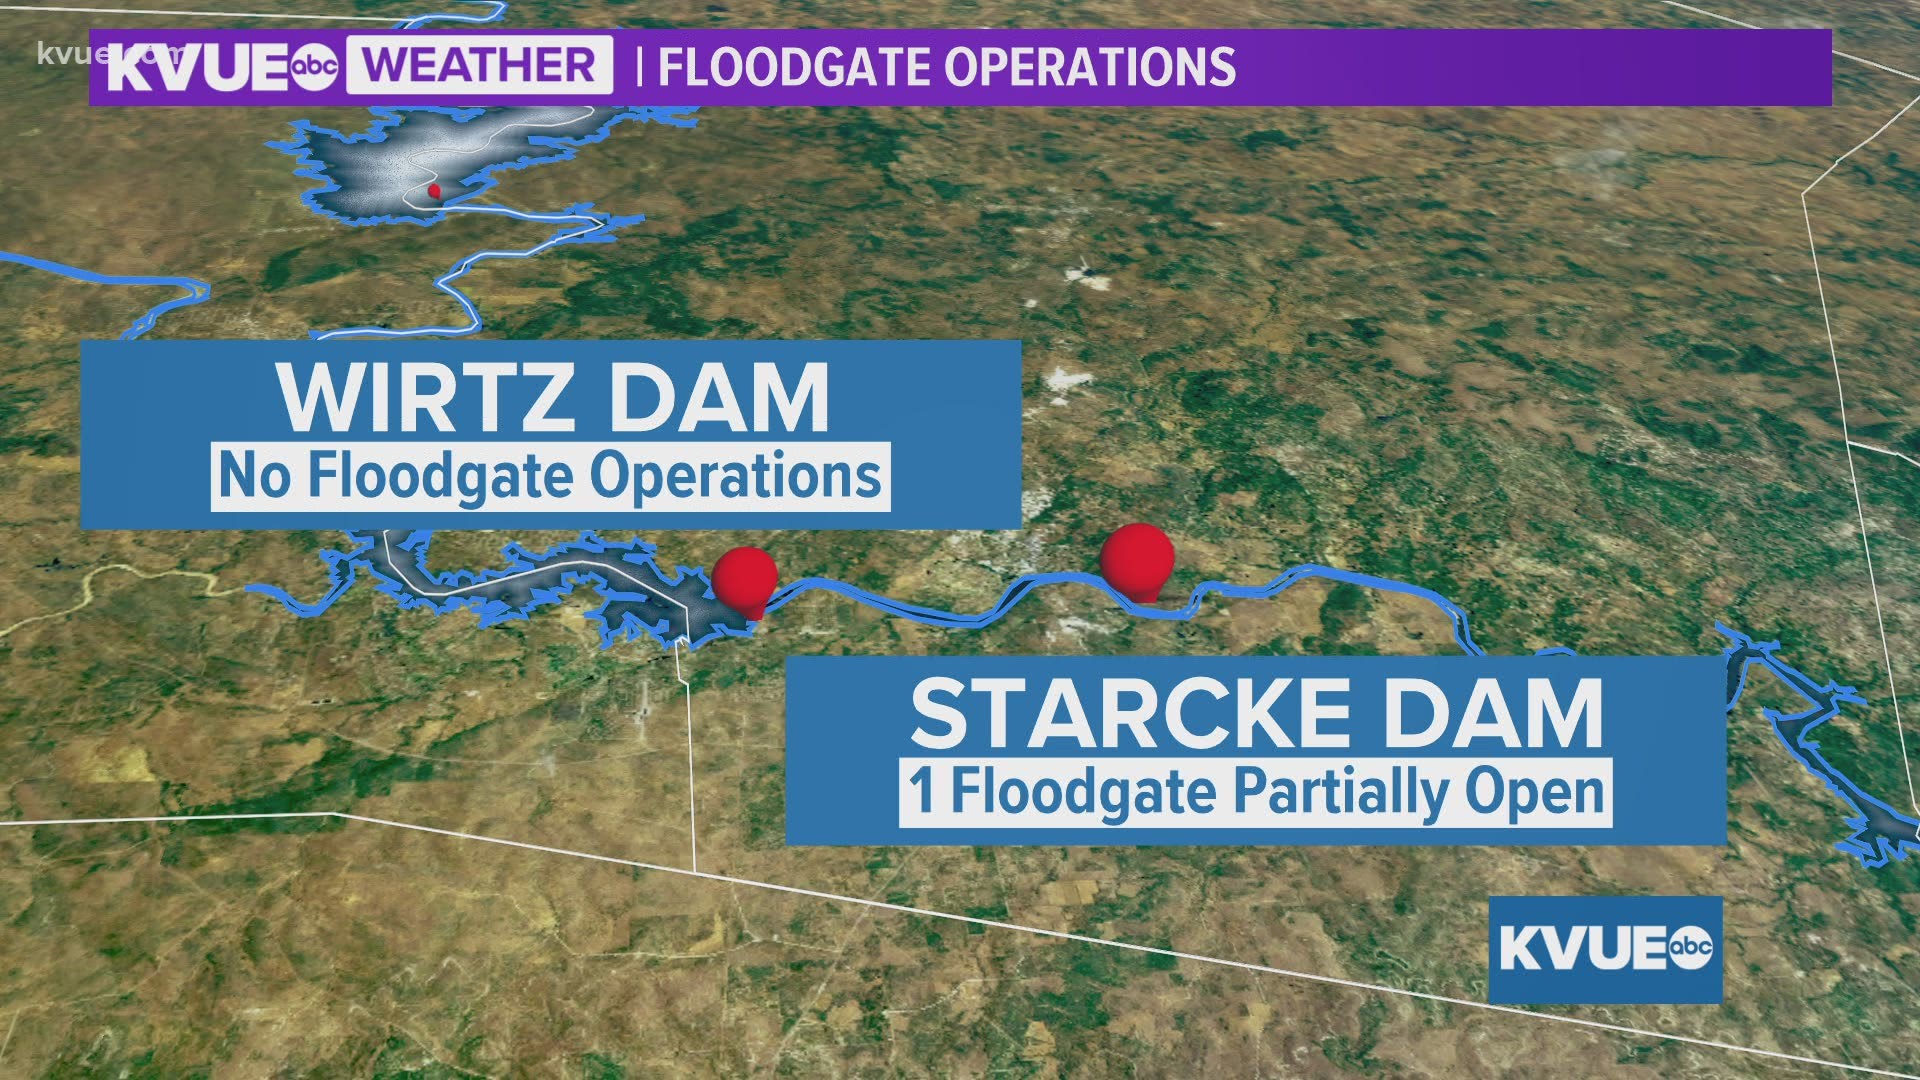 Prolonged rainfall in the area is sparking floodgate operations by the LCRA.